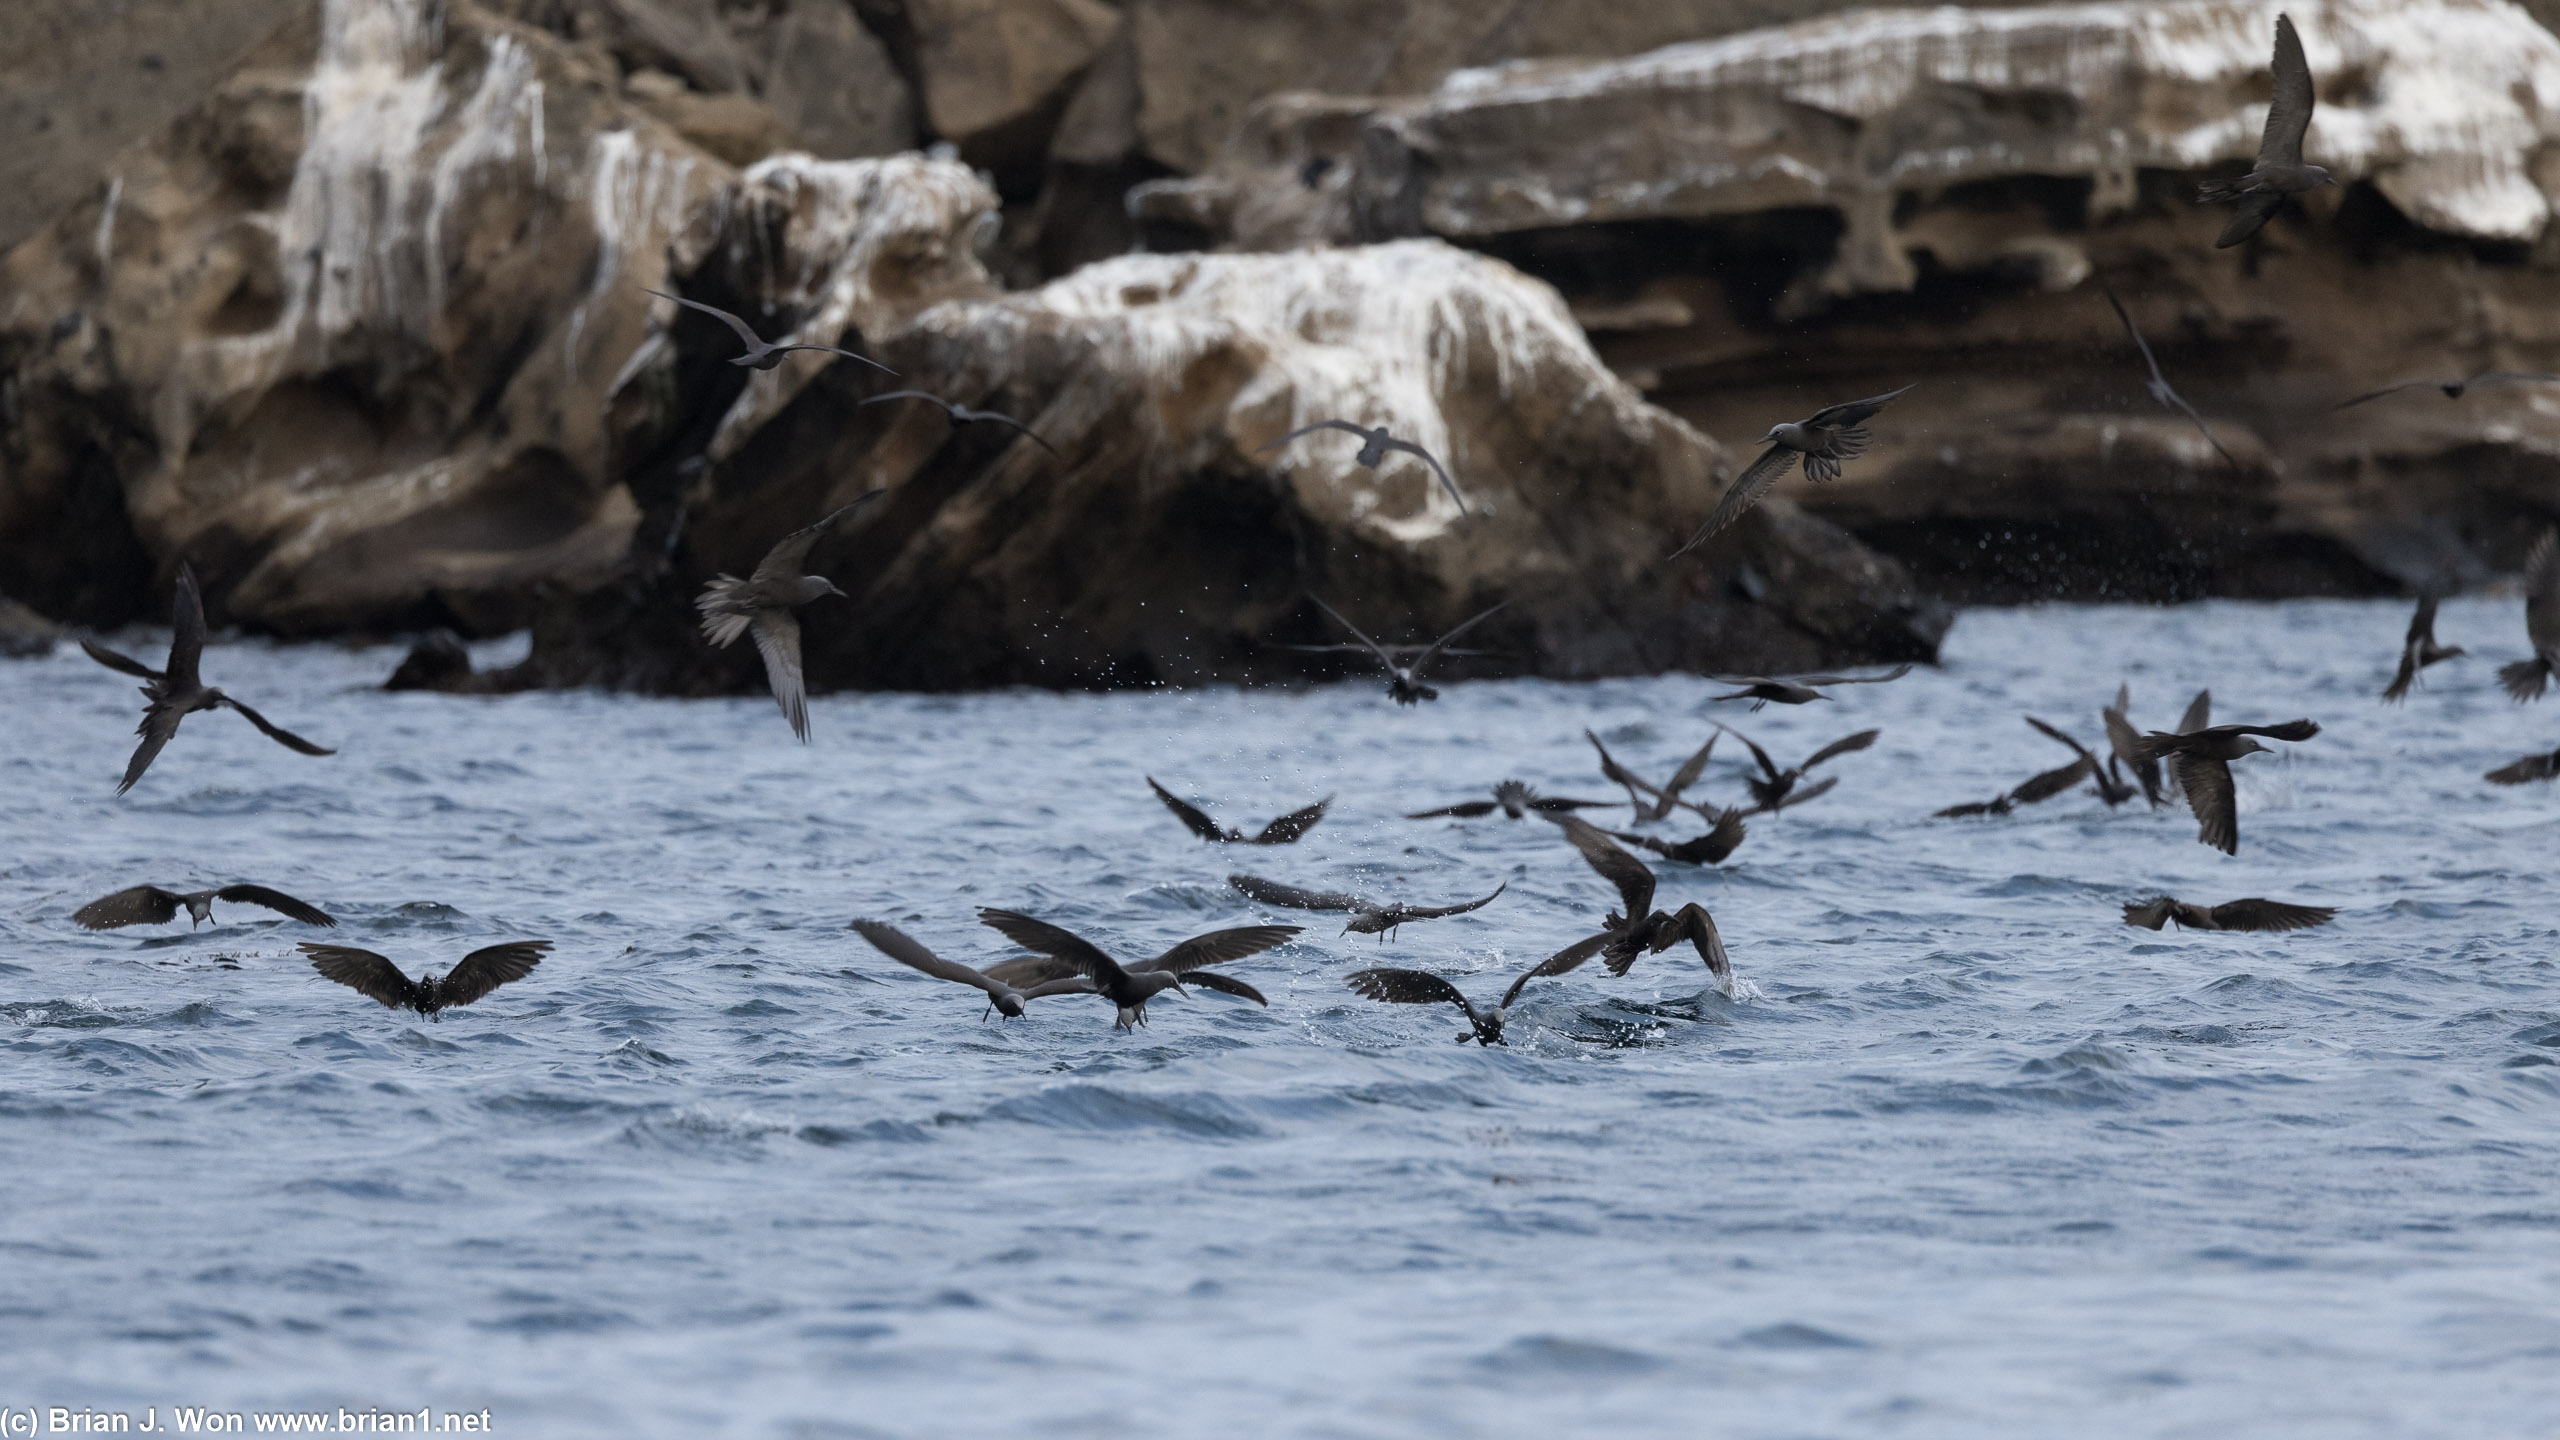 From the lighter heads, guessing these are brown noddy terns.